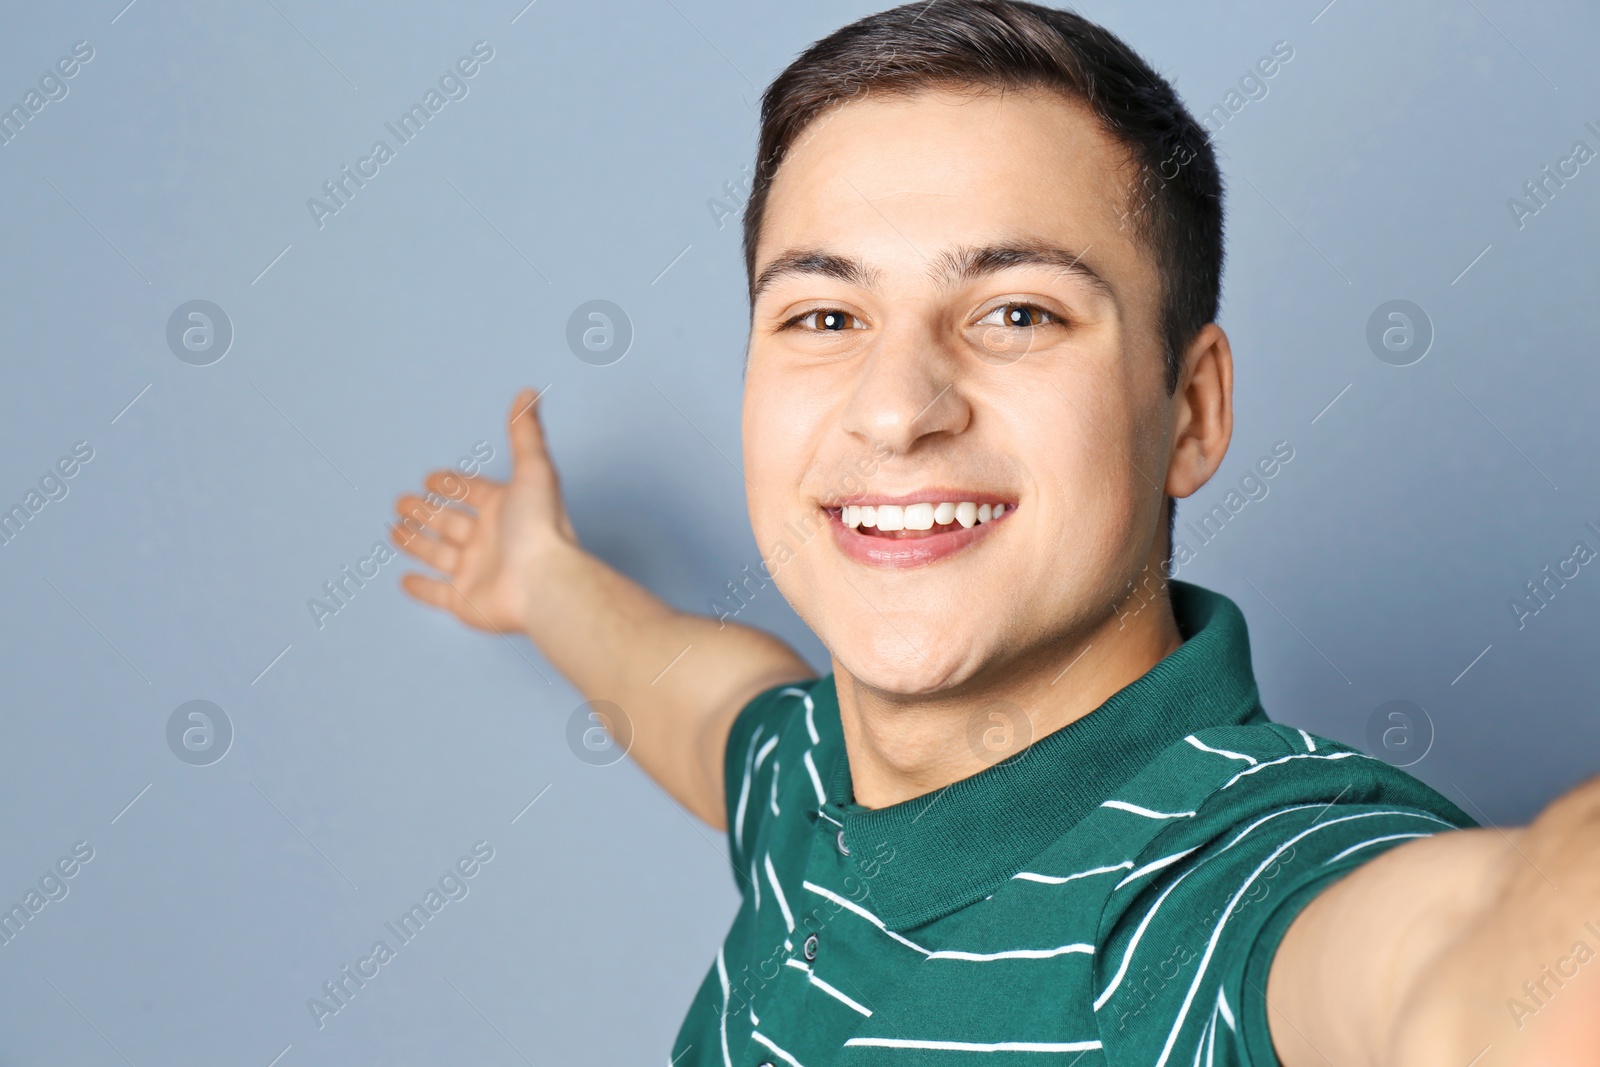 Photo of Young handsome man taking selfie against grey background